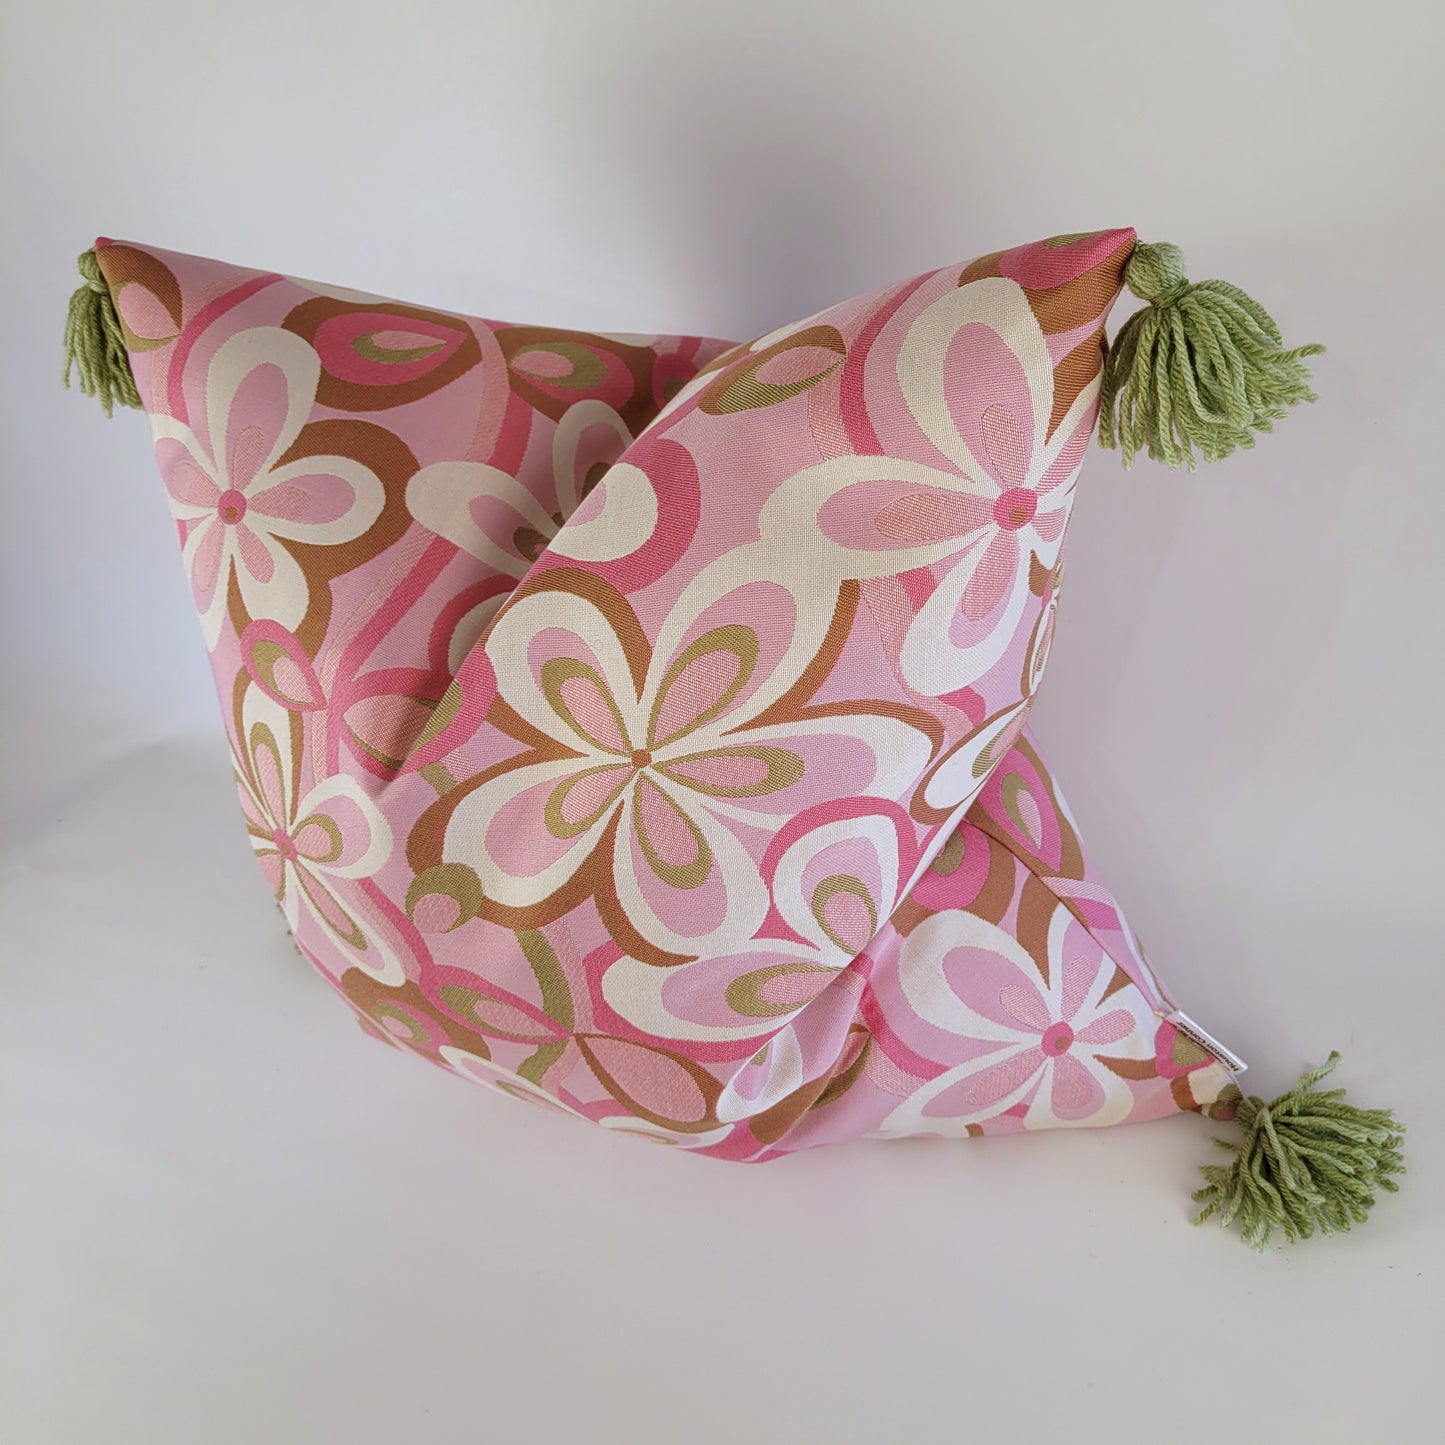 Vintage 1970s Pink Flower-Power Pillow with Handmade Tassels 22"